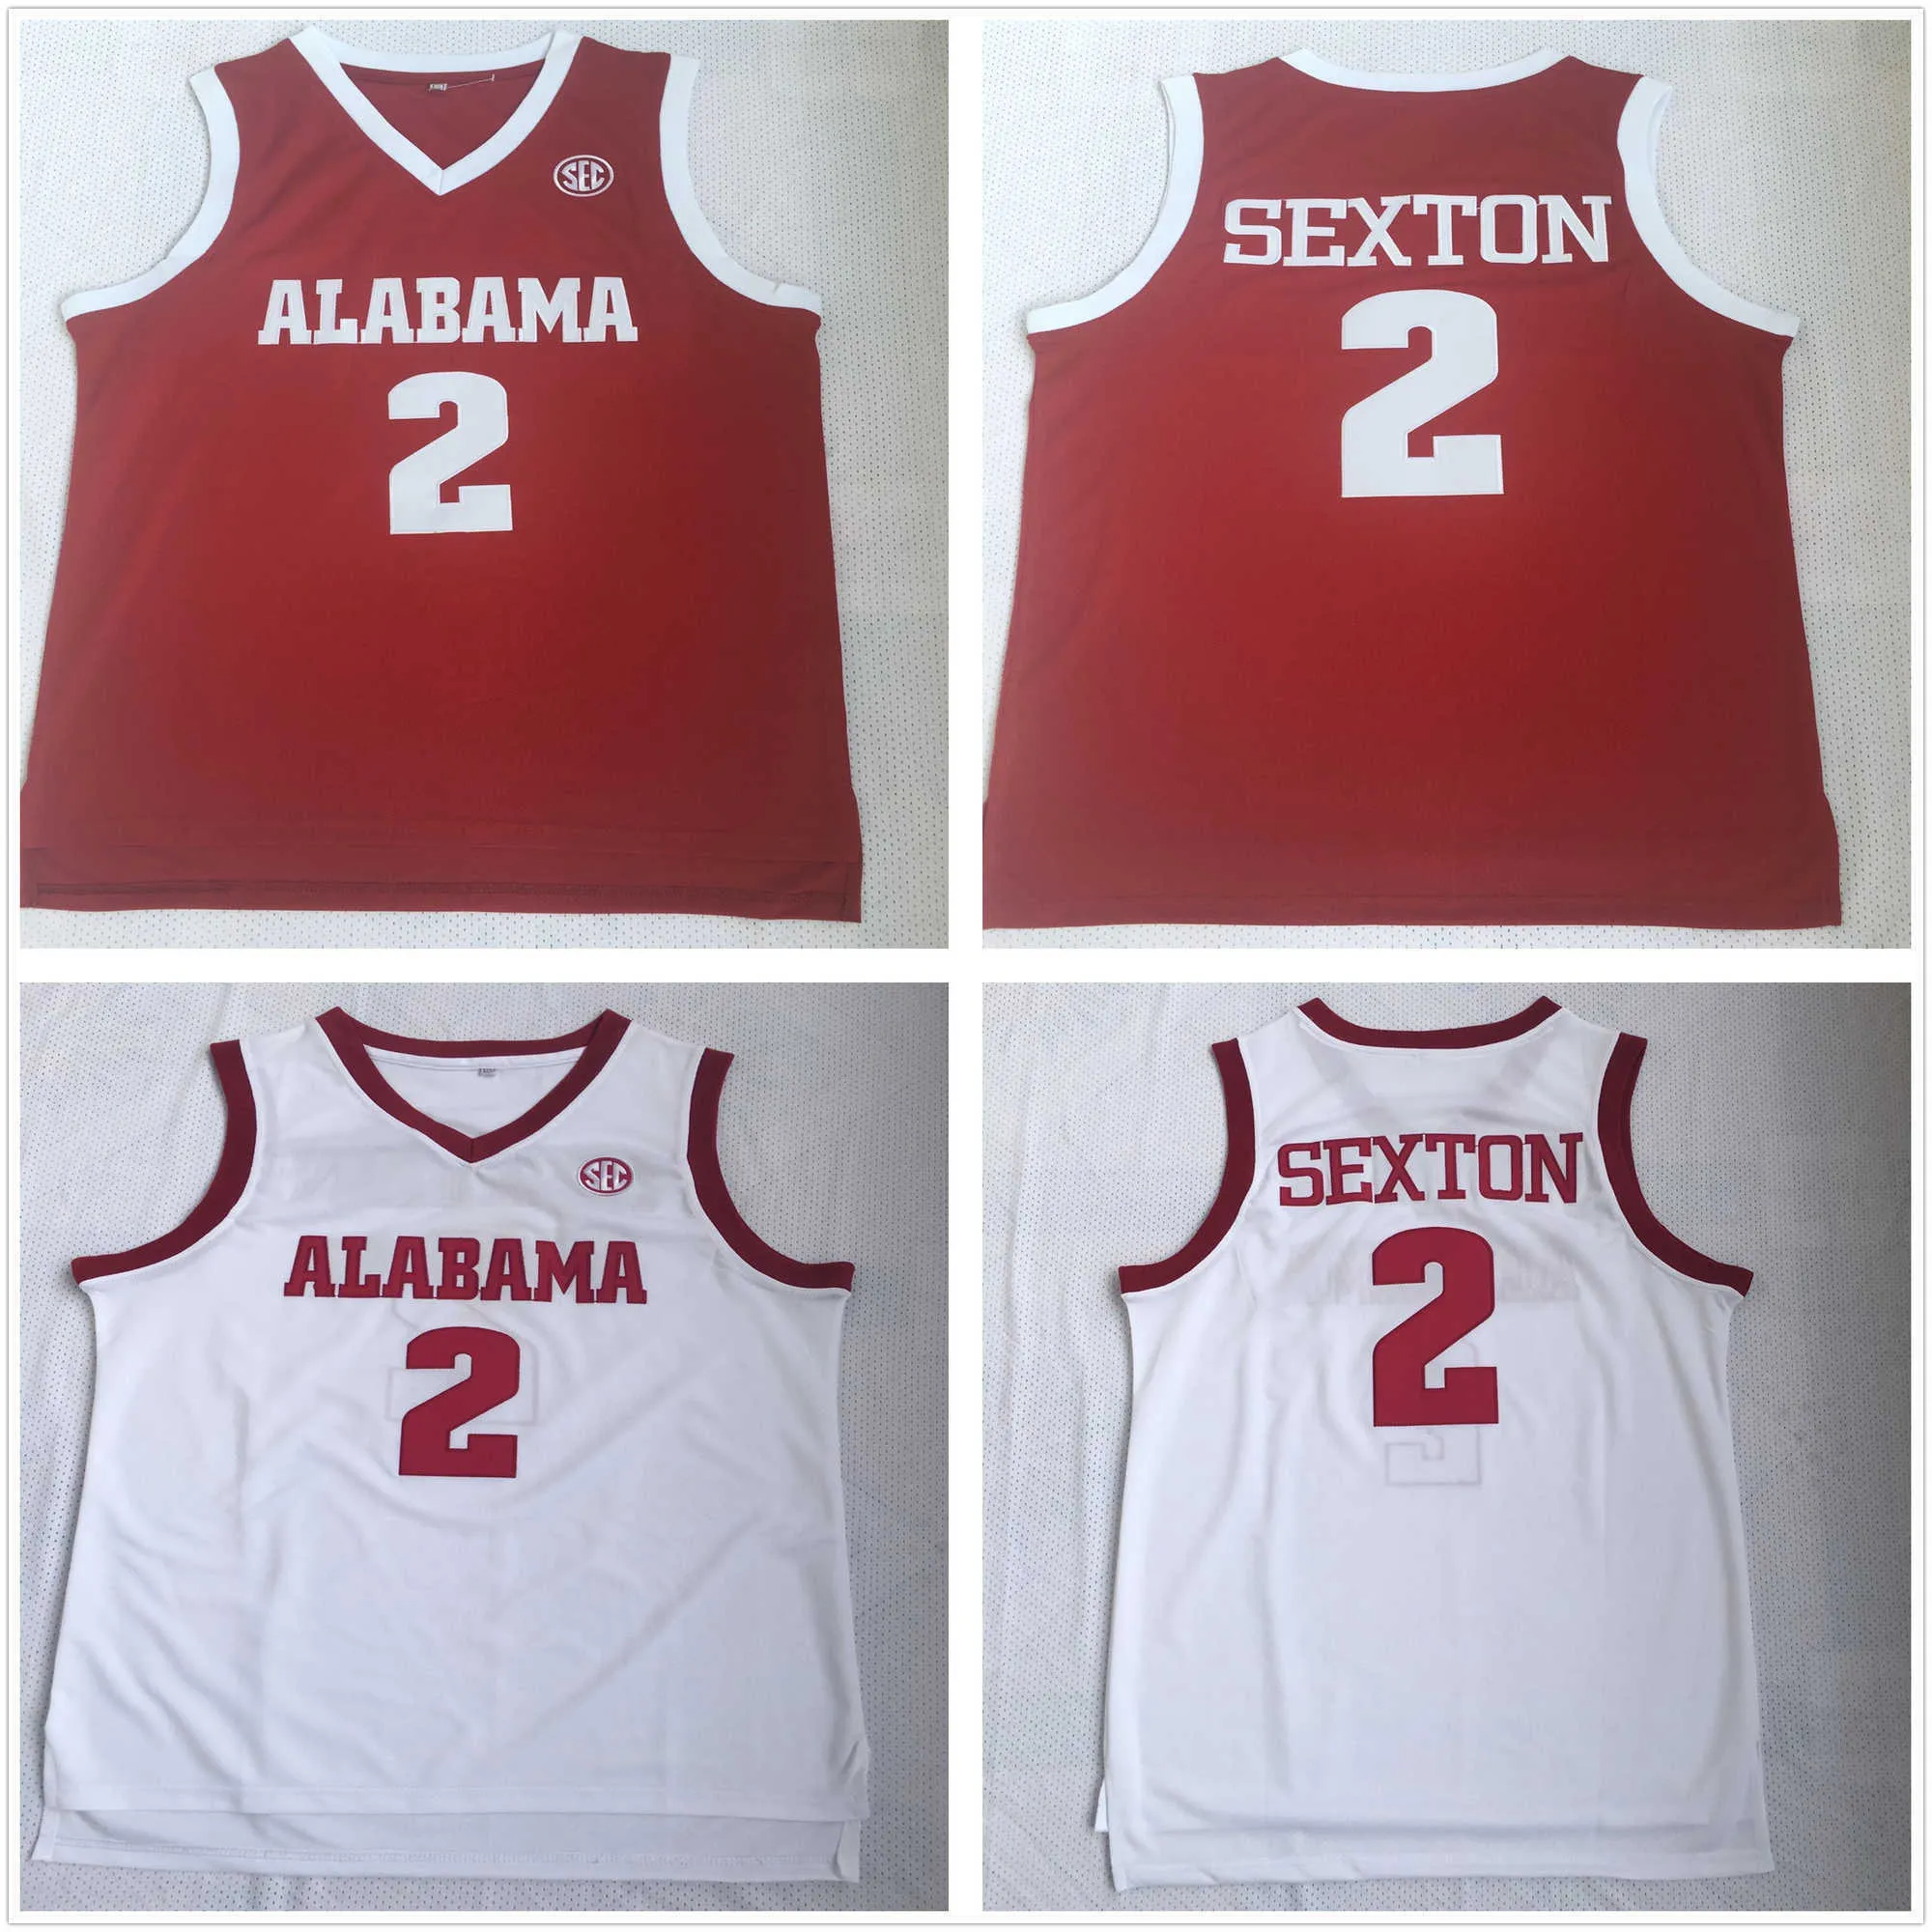 Stitched NCAA Mens Collin Sexton Basketball Jerseys College Jersey Vintage #2 Home Red White Shirts S-2XL